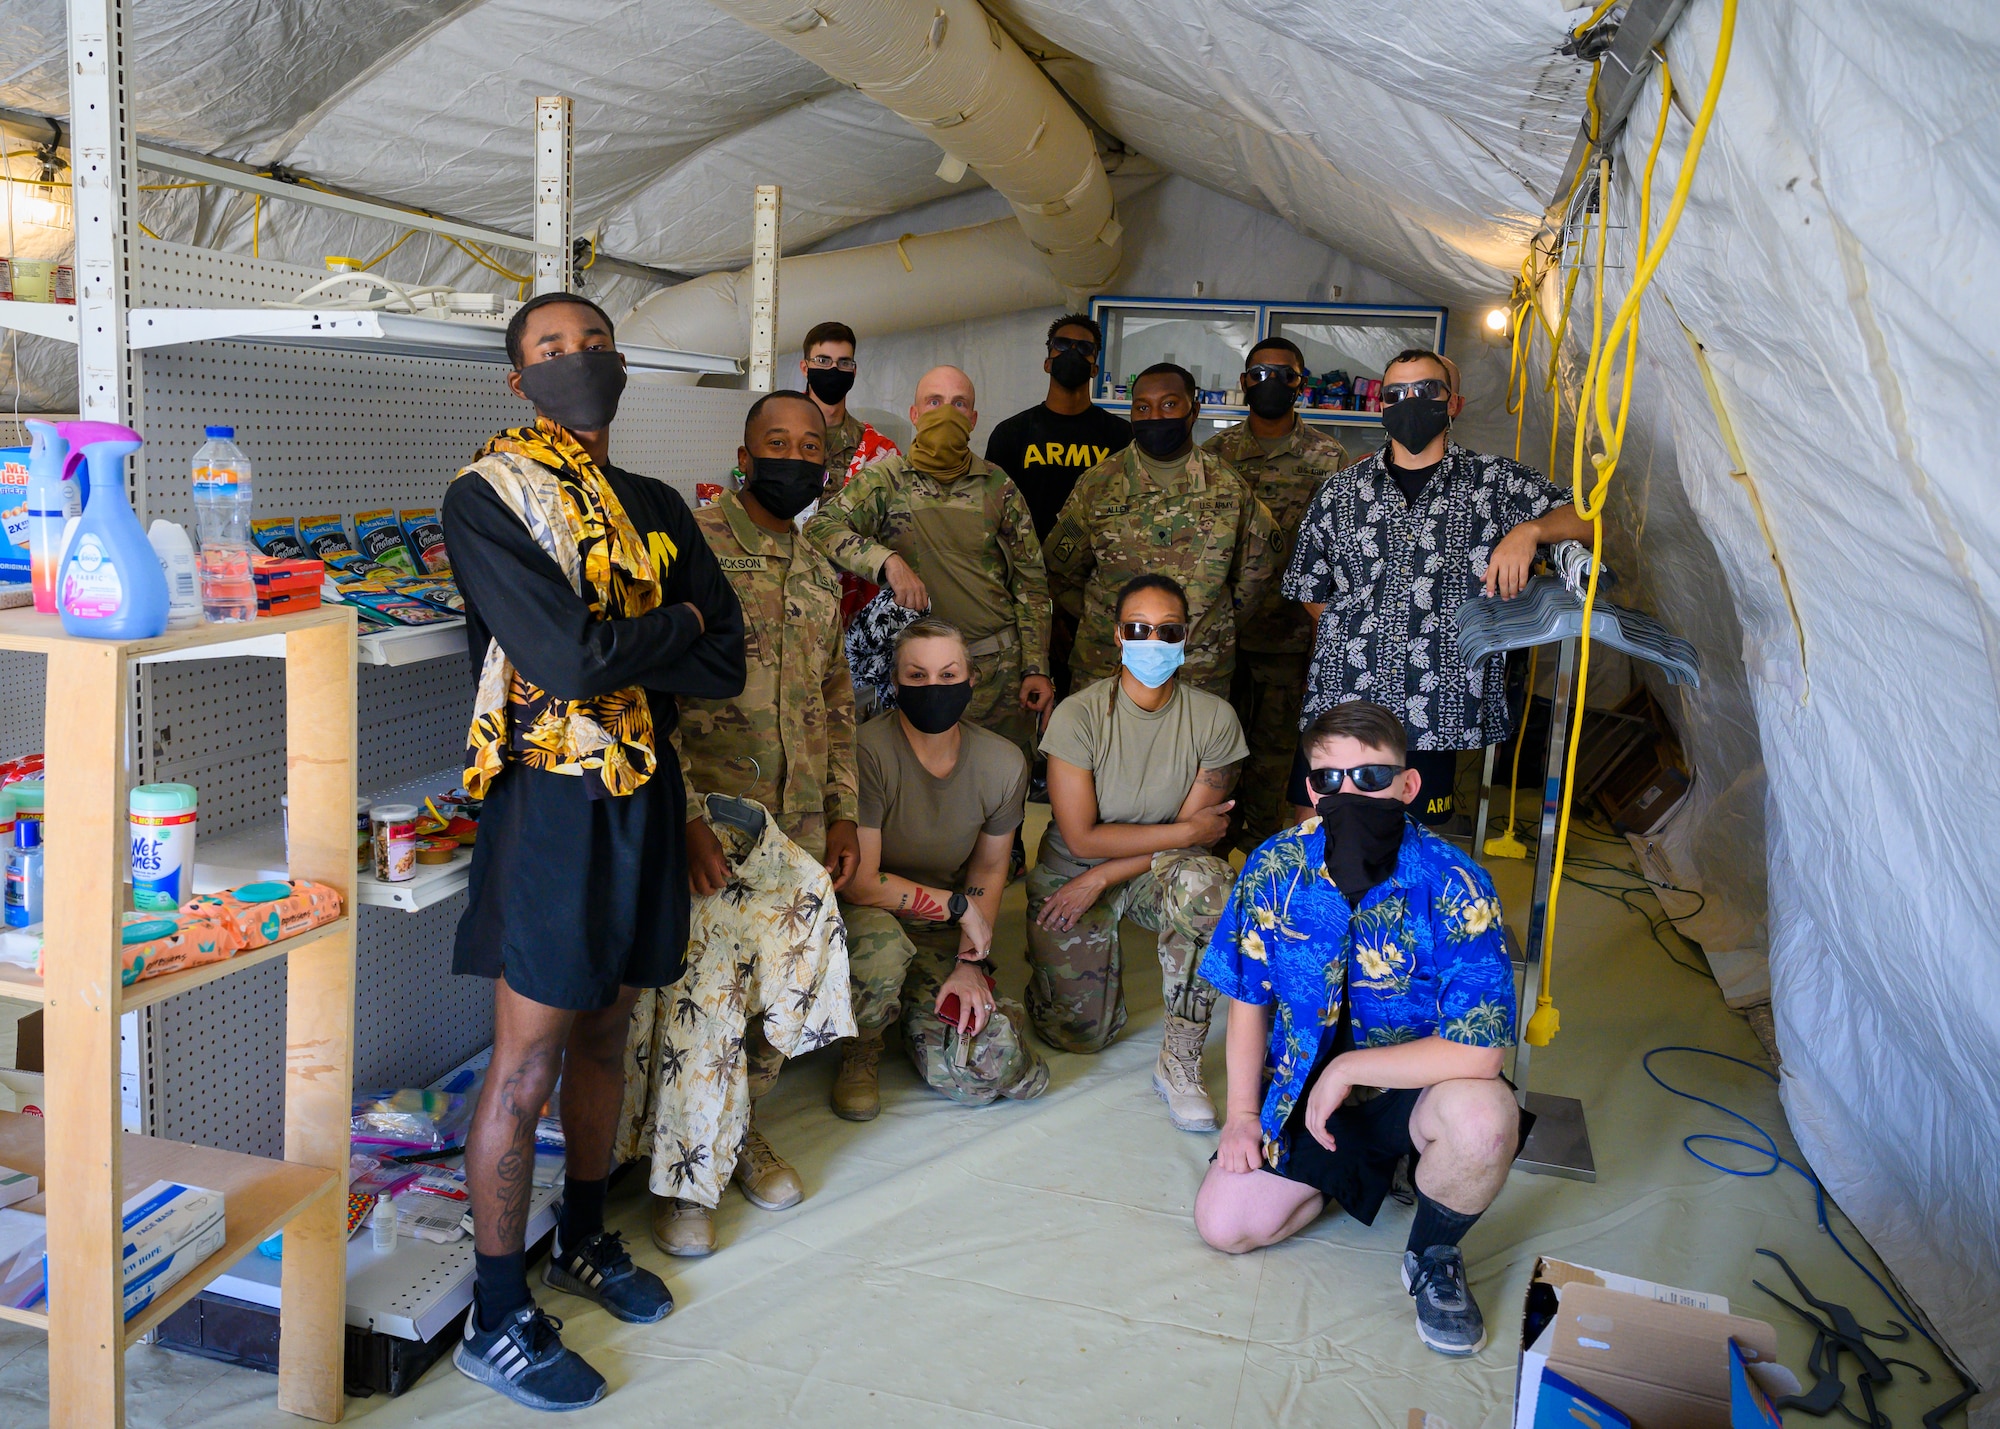 U.S service members deployed to Prince Sultan Air Base, Kingdom of Saudi Arabia, pose for a photo after putting together the U.S. Serve-Us members Attic,  Sept. 11 2021. The attic acts as an organized donation center open around-the-clock for gently-used items and was started by an all-volunteer team, modeled after the concept of an Airman’s Attic found on most Air Force bases. Joint members leaving PSAB are now able to donate unneeded items prior to departure while new members can acquire needed items for free, saving money and reducing the amount of waste produced at PSAB. (U.S. Air Force photo by Senior Airman Samuel Earick)